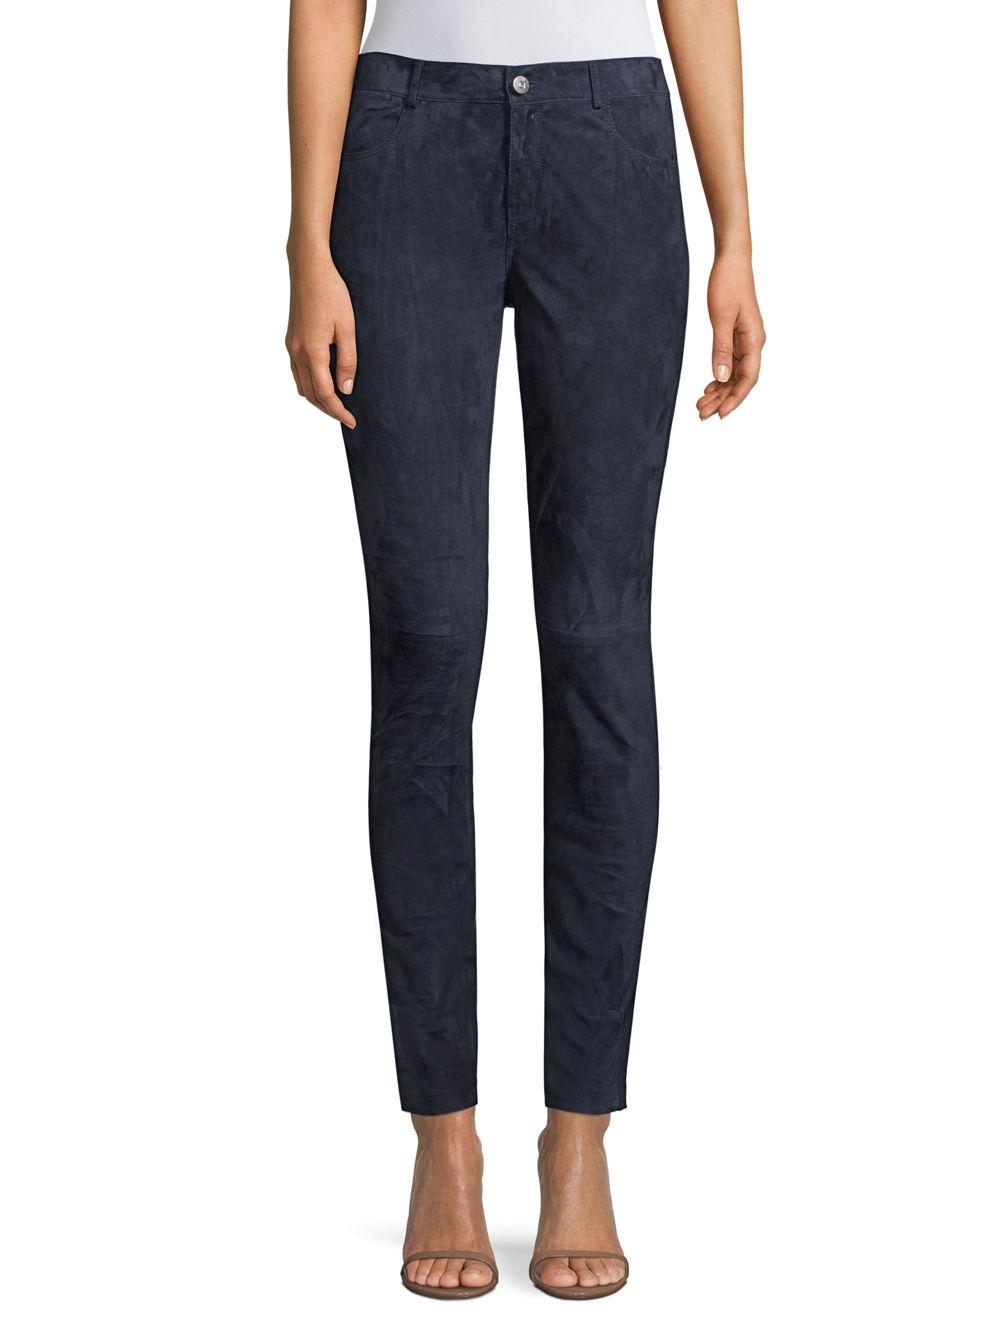 Lafayette 148 New York Mercer Suede Front Pants in Blue - Lyst